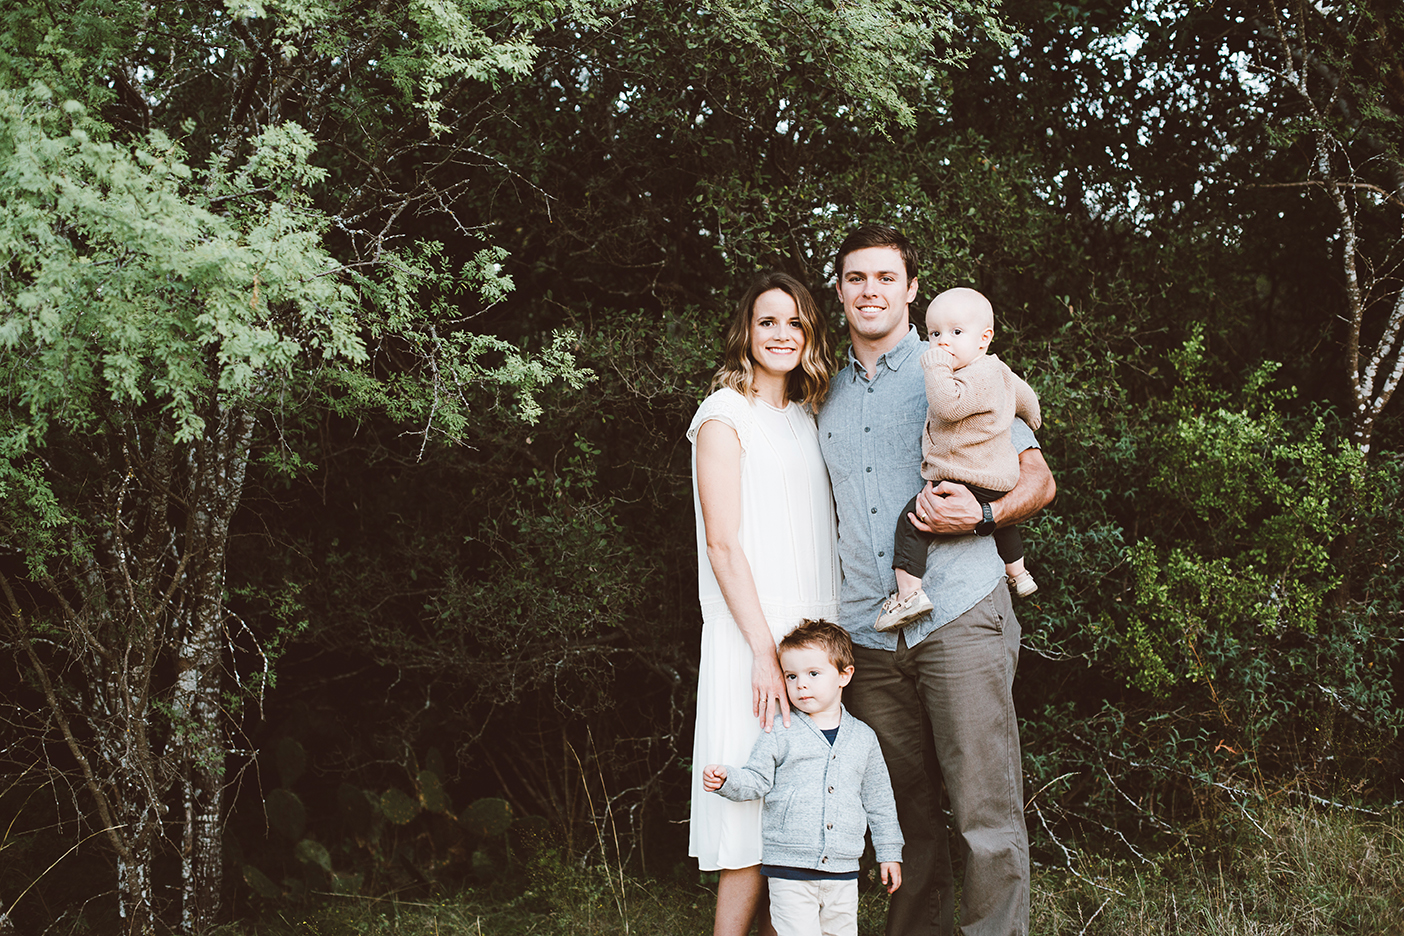 A family portrait that includes former BYU football running back Ryan Folsom, a loving father and aspiring medical student whose his life was cut short in a tragic car accident in January.